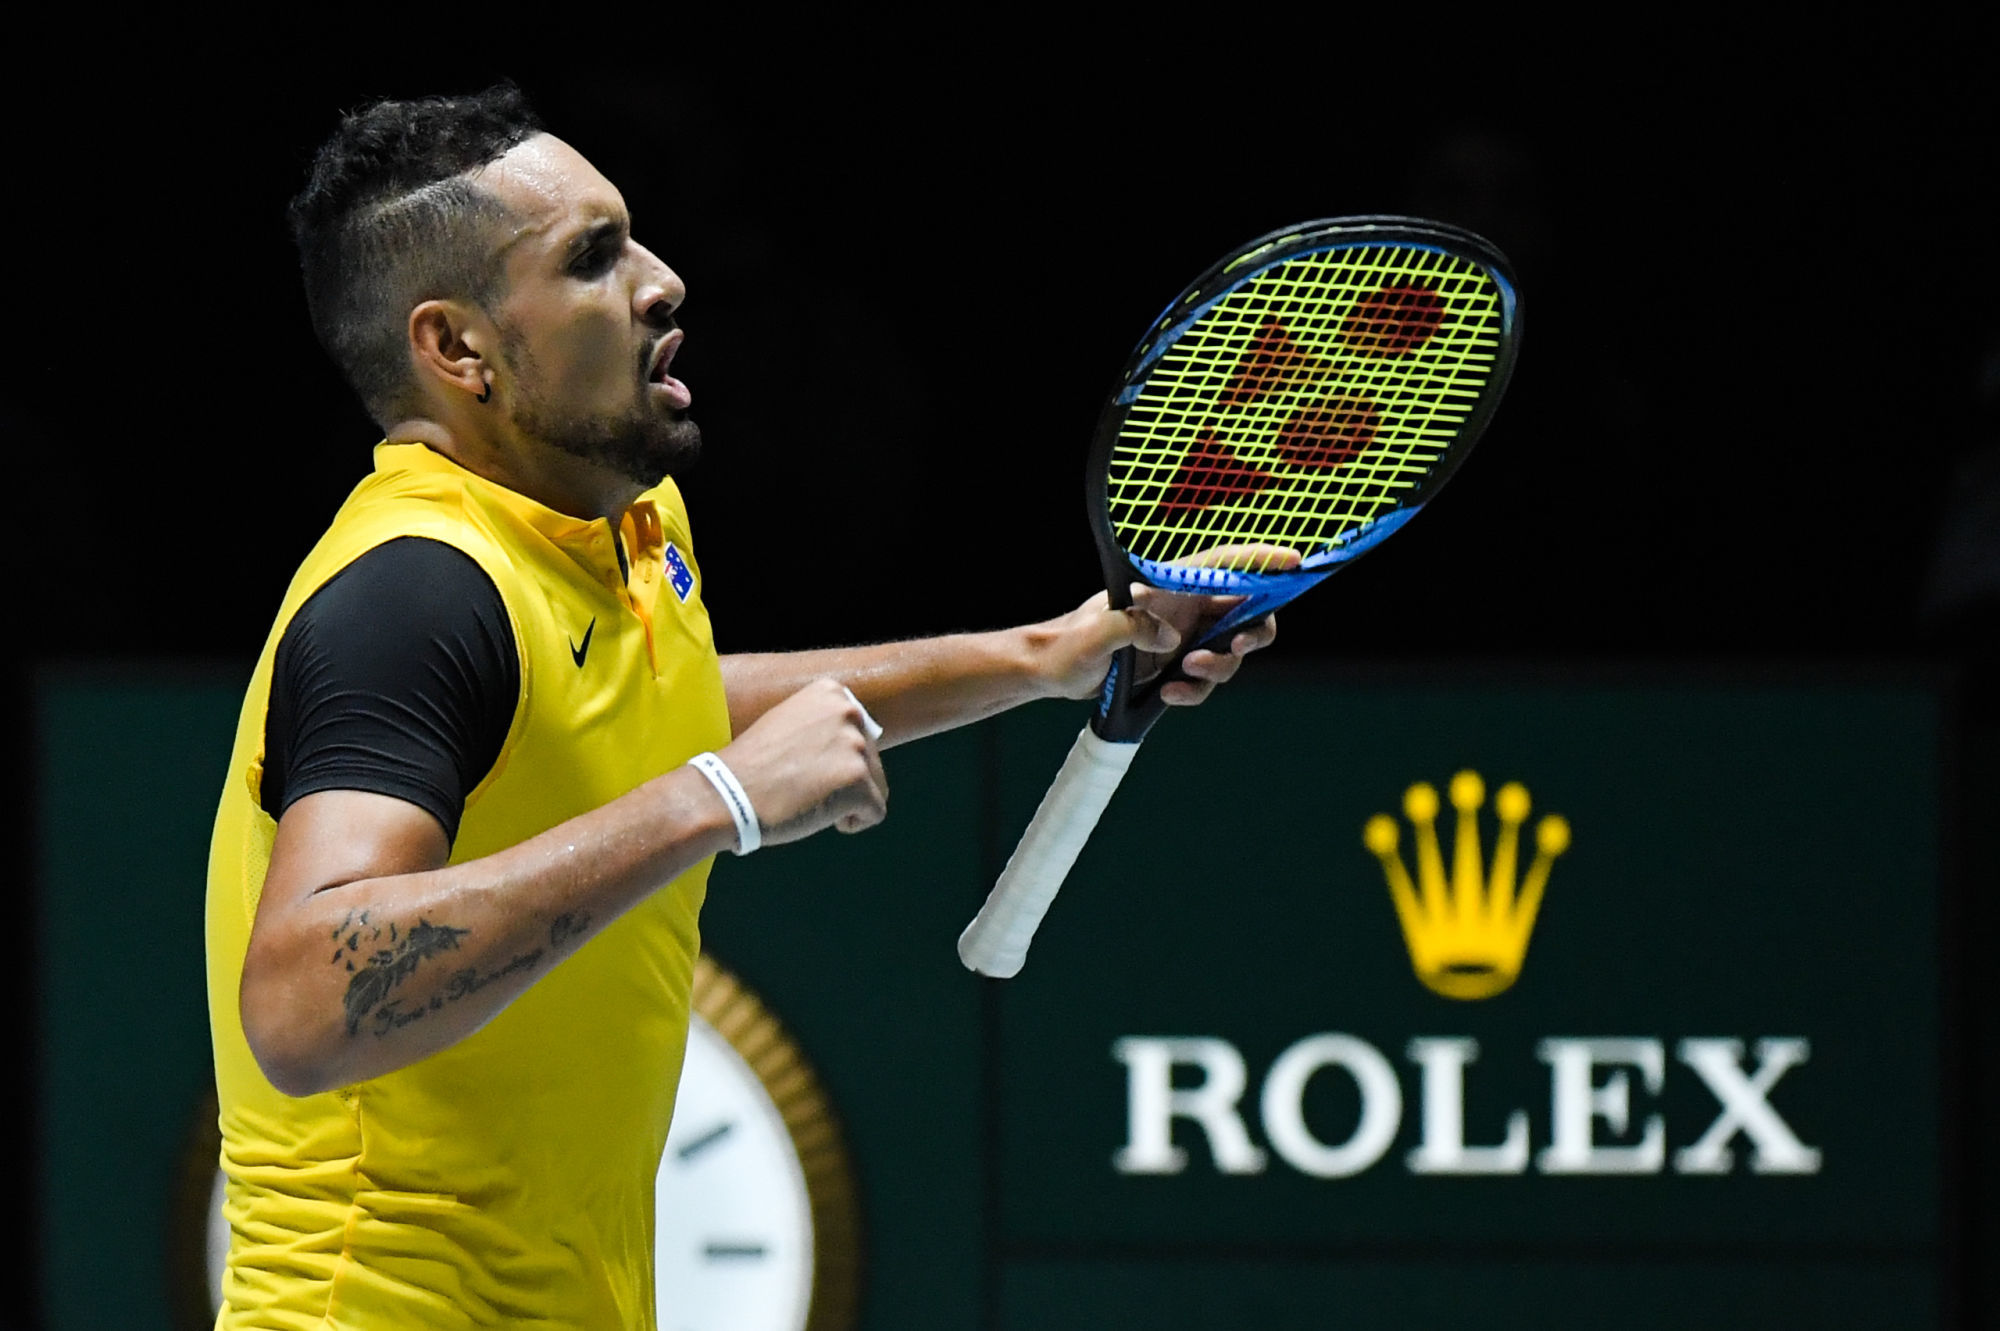 Australian Nick Kyrgios celebrates after winning a tennis match against Belgian Steve Darcis, the first match in the David Cup meeting between Belgium and Australia, Wednesday 20 November 2019, in Madrid, Spain. Belgium and Australia are playing the second game in group D of the group stage of the Davis Cup World Group tennis finals. Both countries won their first meeting.
BELGA PHOTO BENOIT DOPPAGNE 

Photo by Icon Sport - Nick KYRGIOS